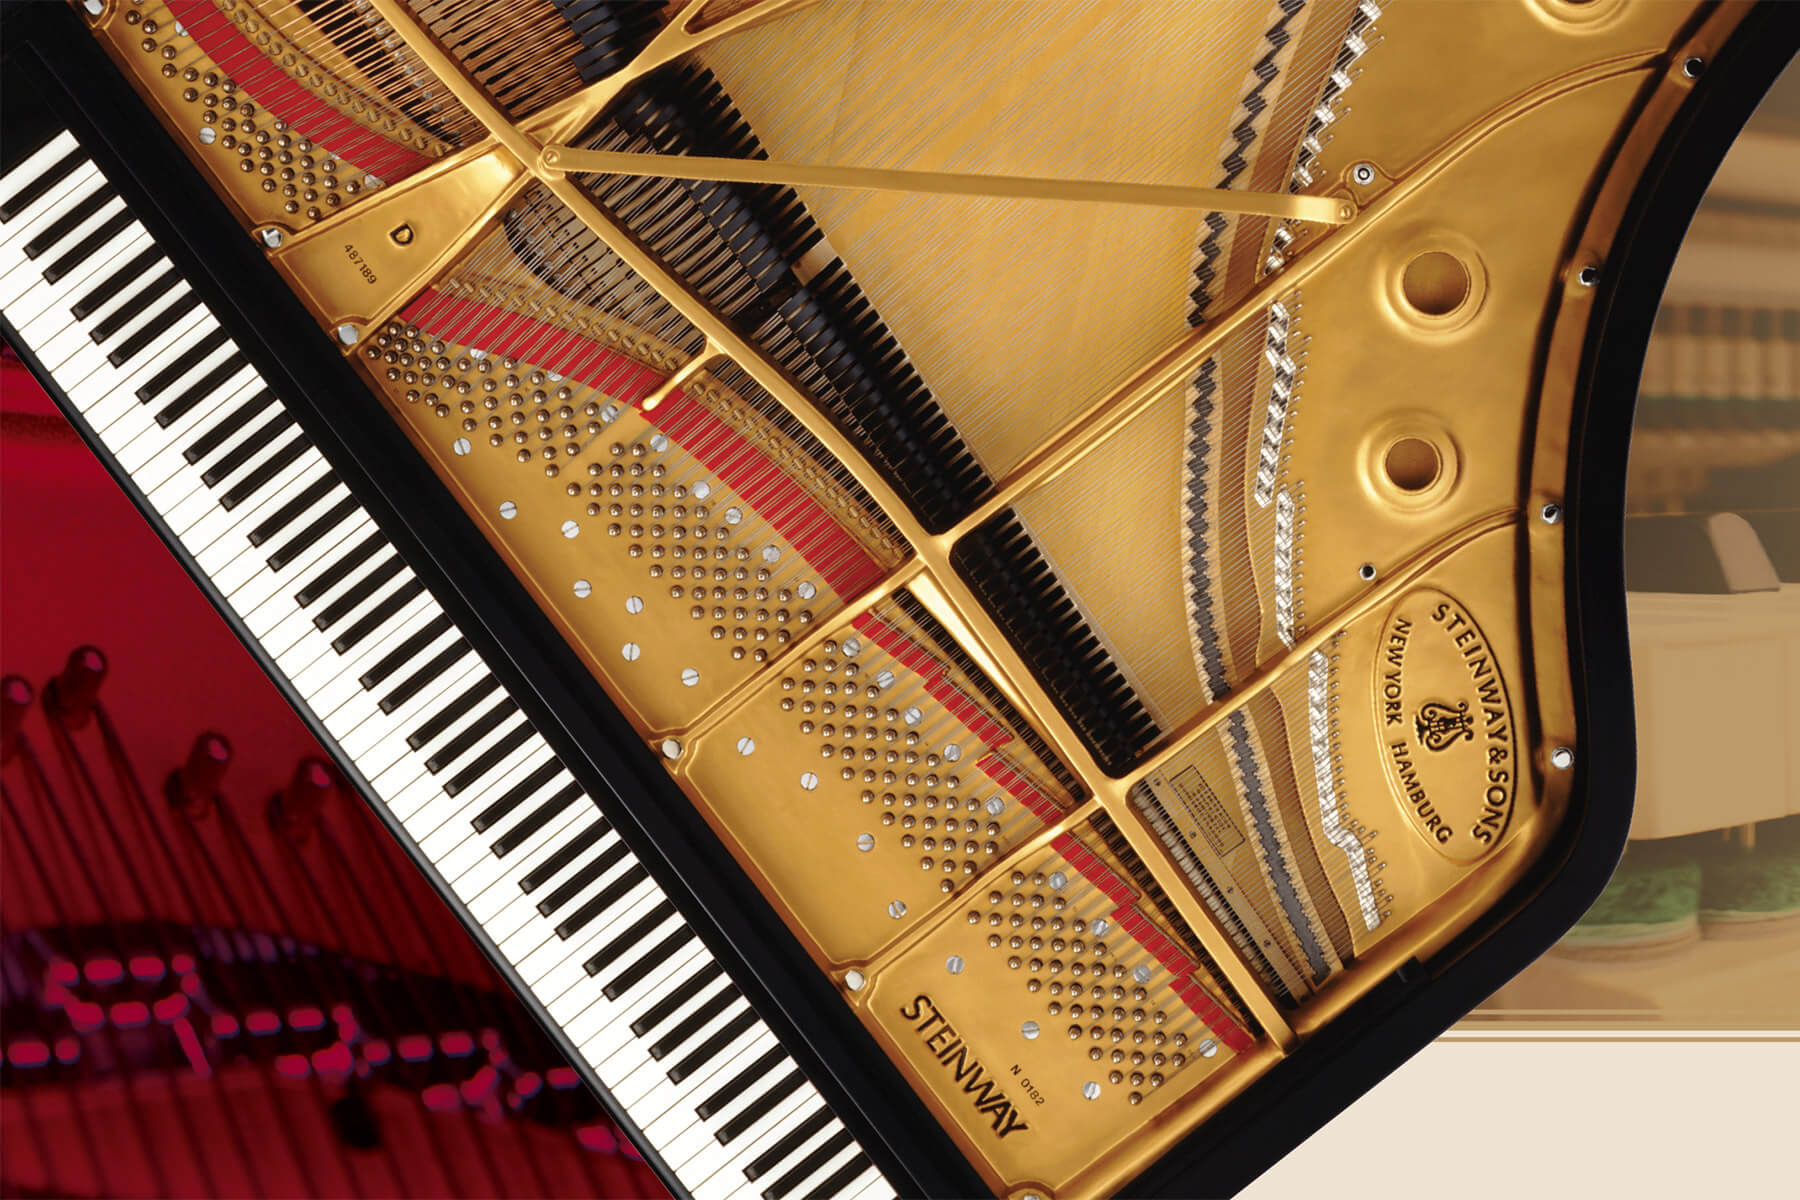 Going All-Steinway: A Student’s Steinway Experience